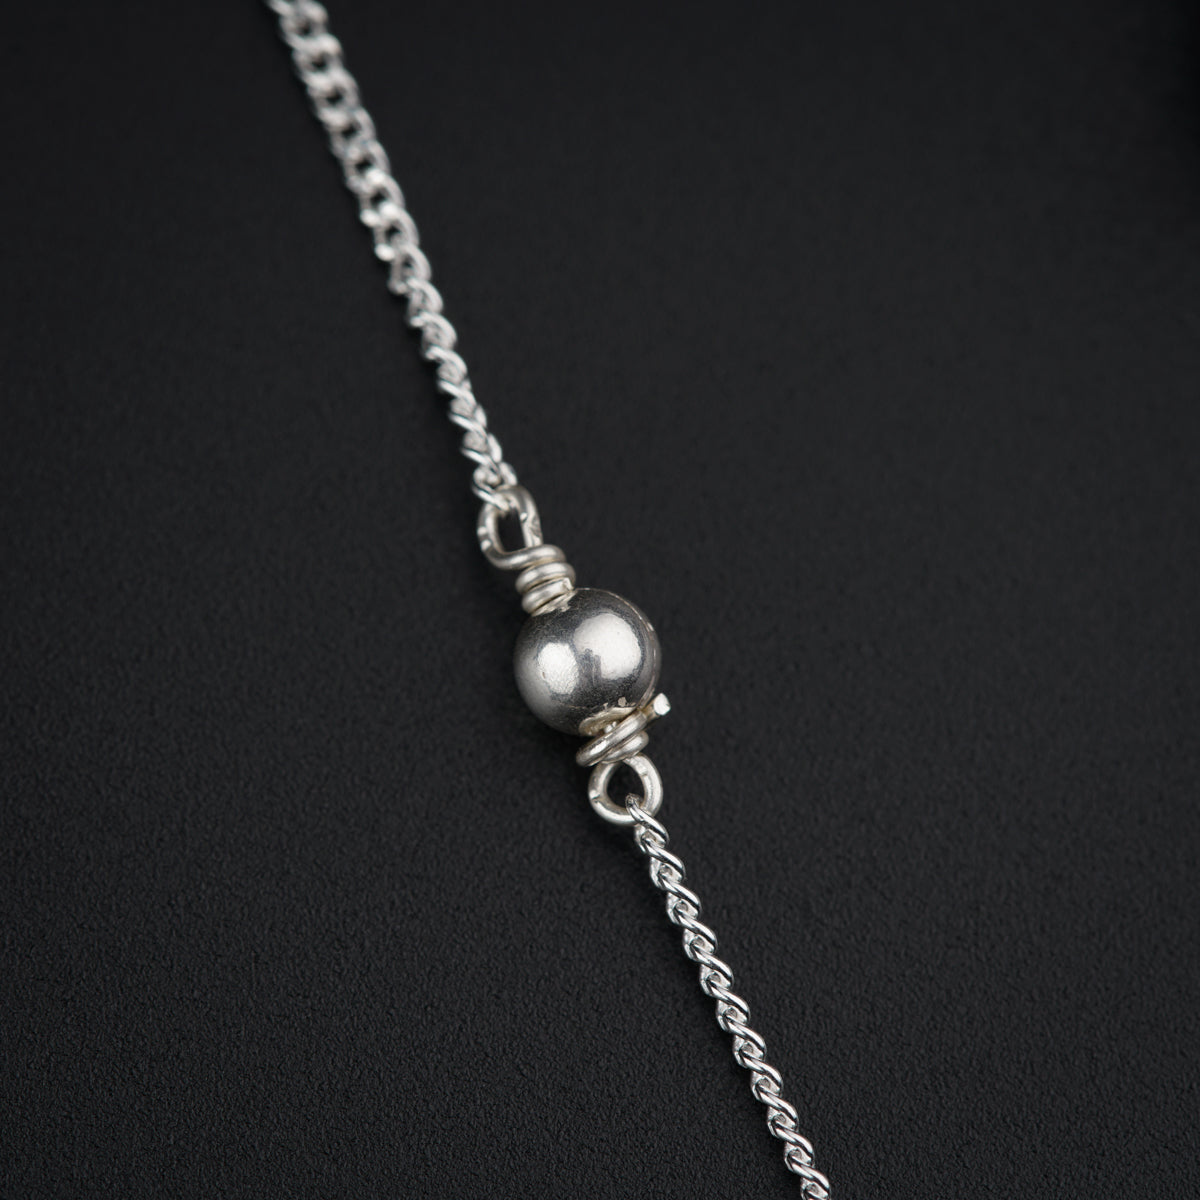 Dainty Silver Necklace With Semi Precious stones and Silver Beads